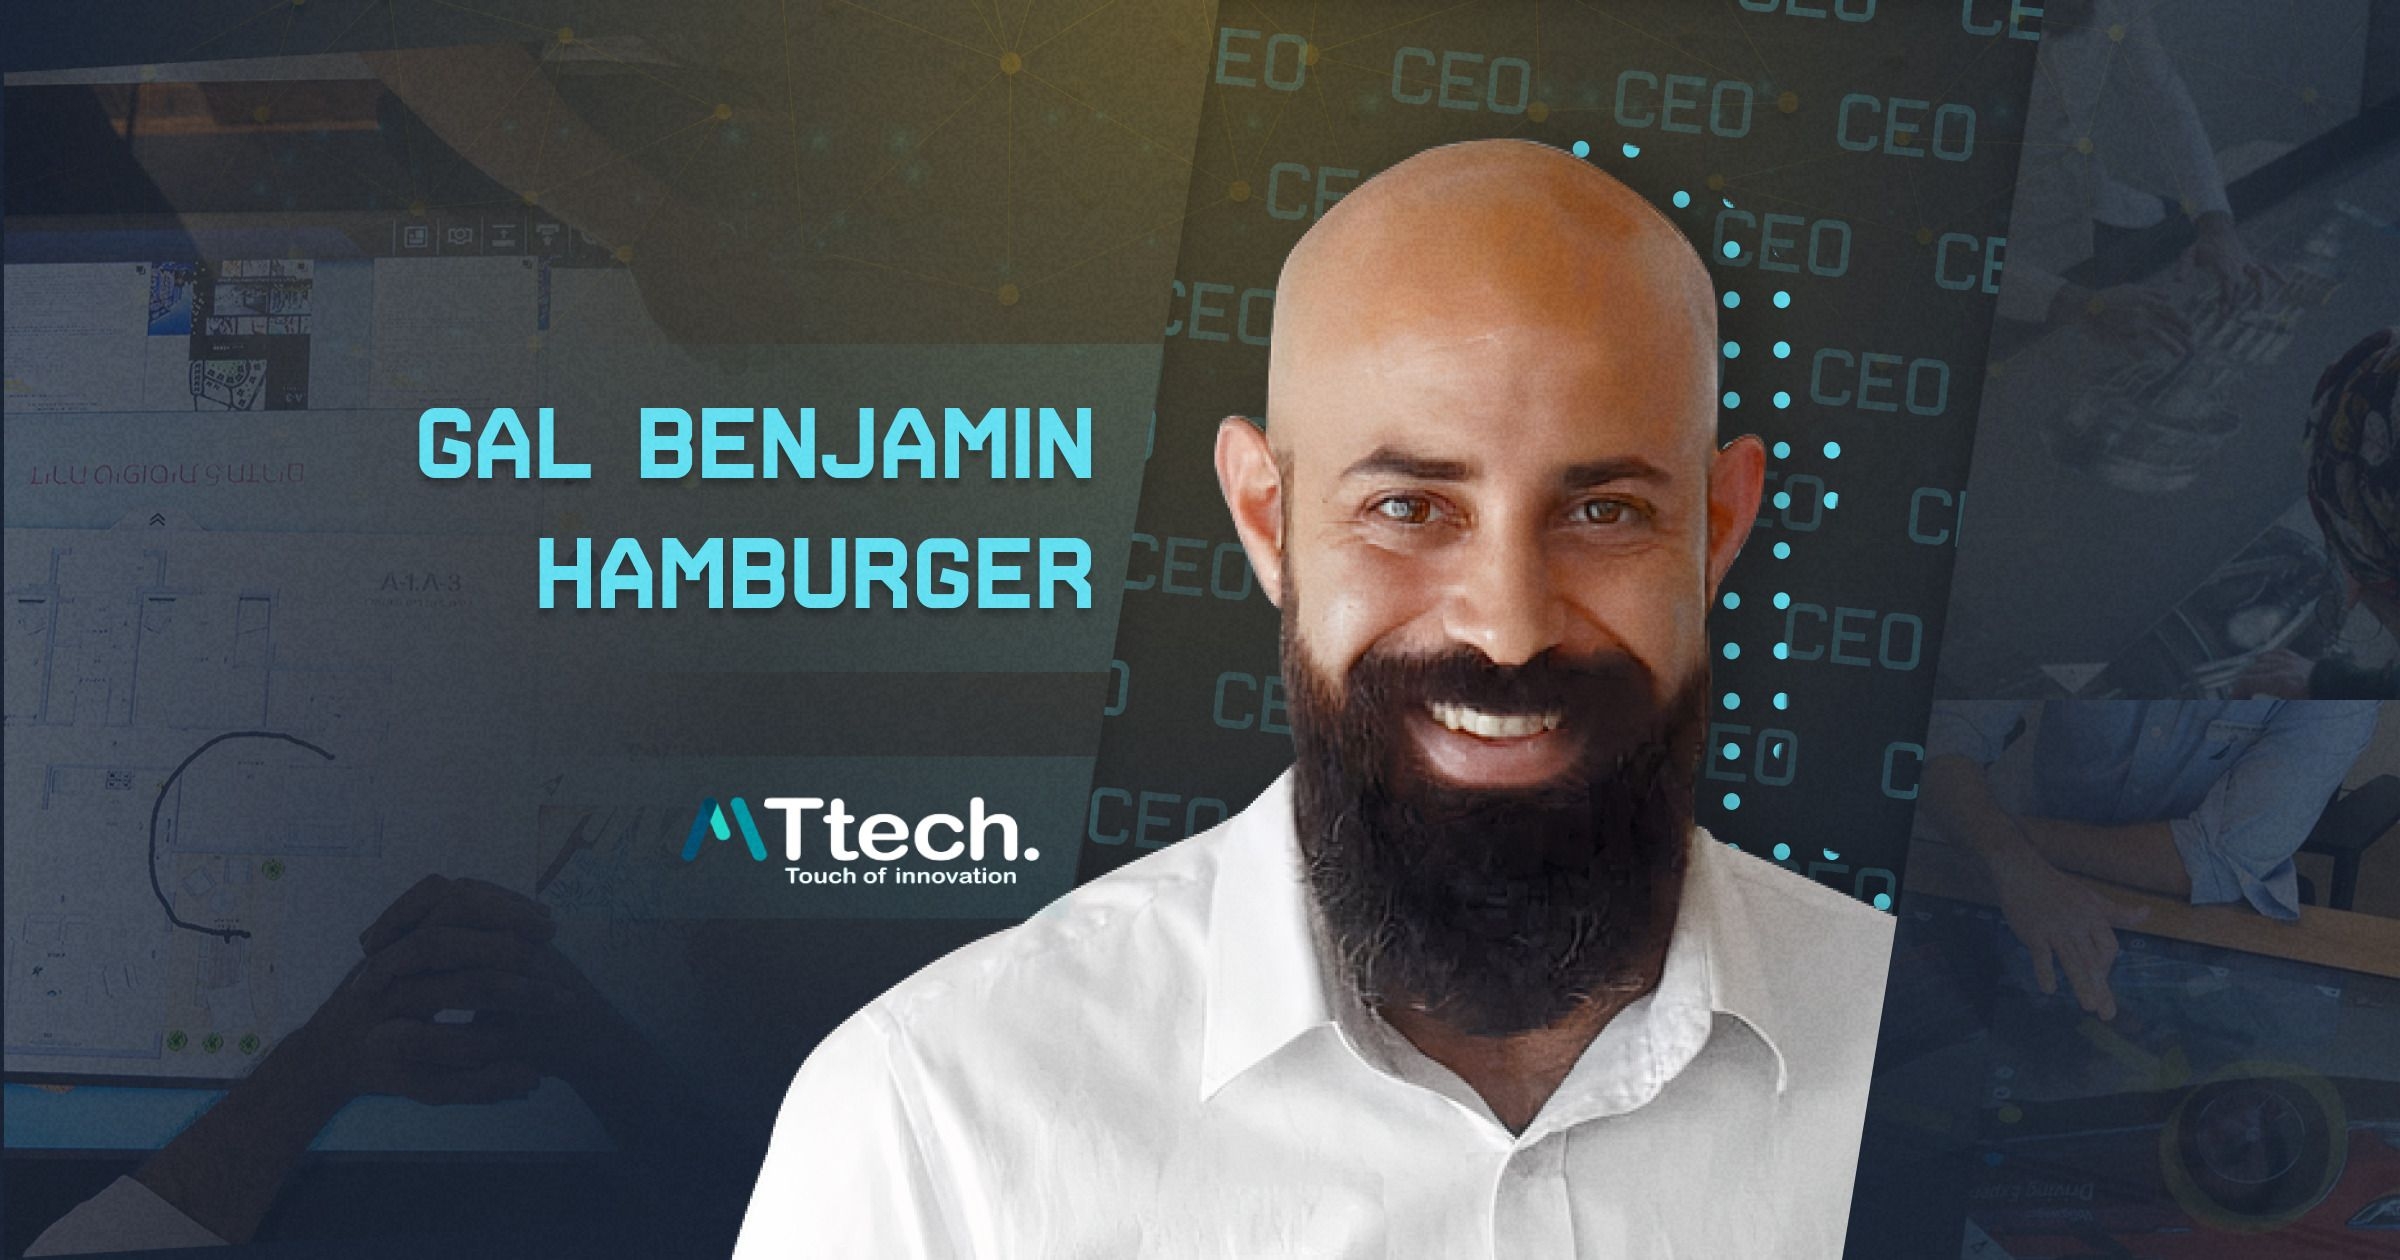 Gal Benjamin Hamburger CEO of MTtech: Spearheading Smart Solutions With The Purpose of Connecting People